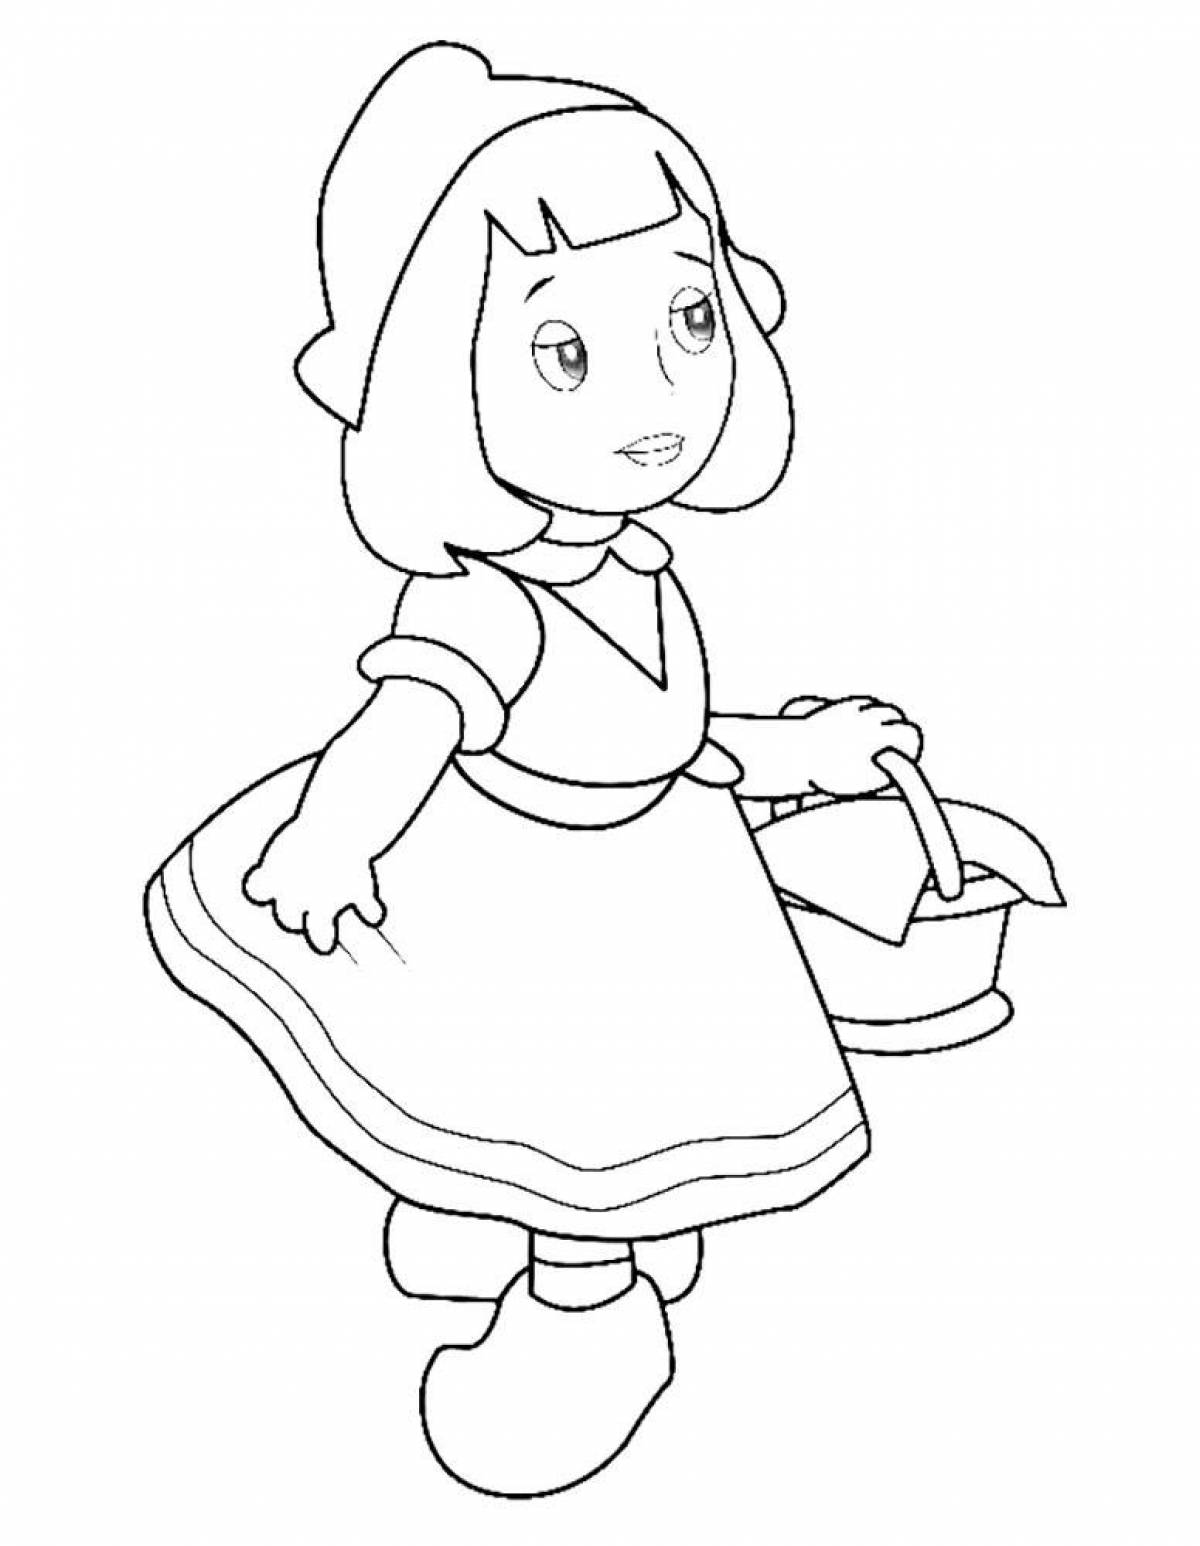 Coloring pages little red riding hood little red riding hood